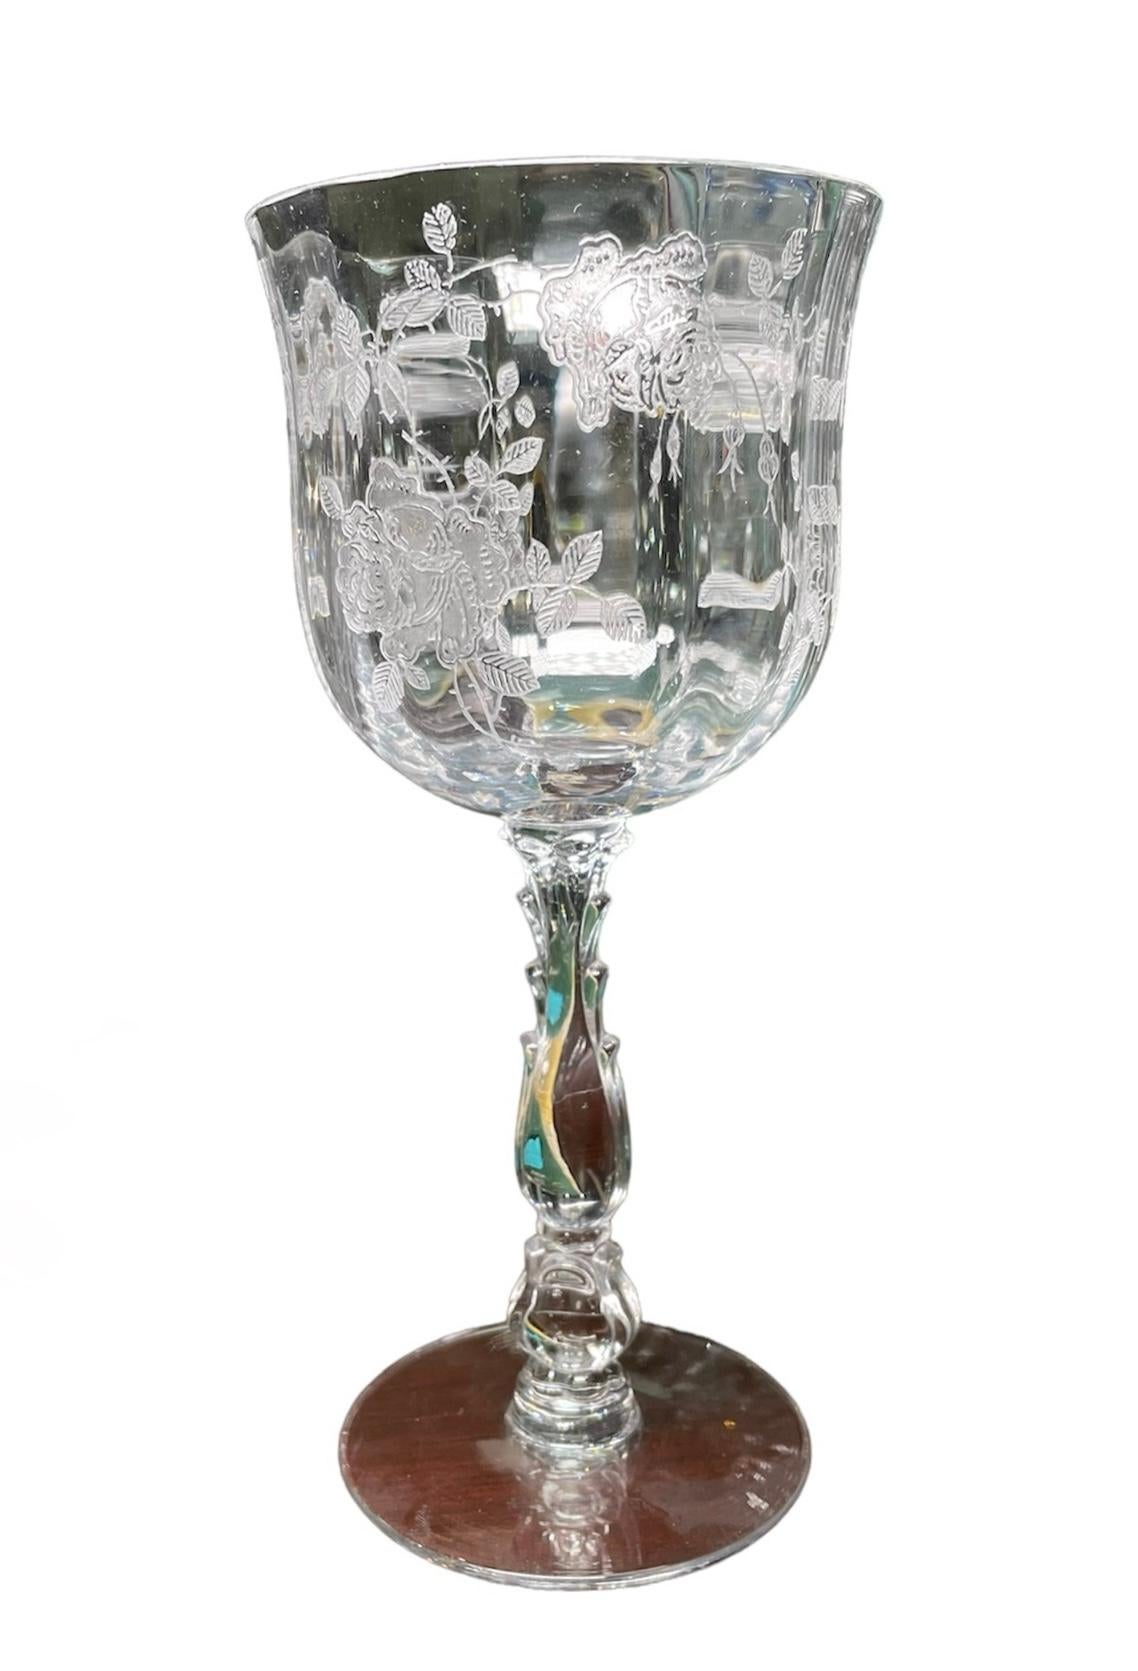 This is a Set of Fostoria Glass Willowmere Pattern. It depicts a set of 20 etched glasses adorned with bold roses on the vines. The set consists of WineGlasses- 2.18” diameter/ height -5.38” ( 4); Claret Wine Glasses - 2.25 “ diameter/ height-5.75 “